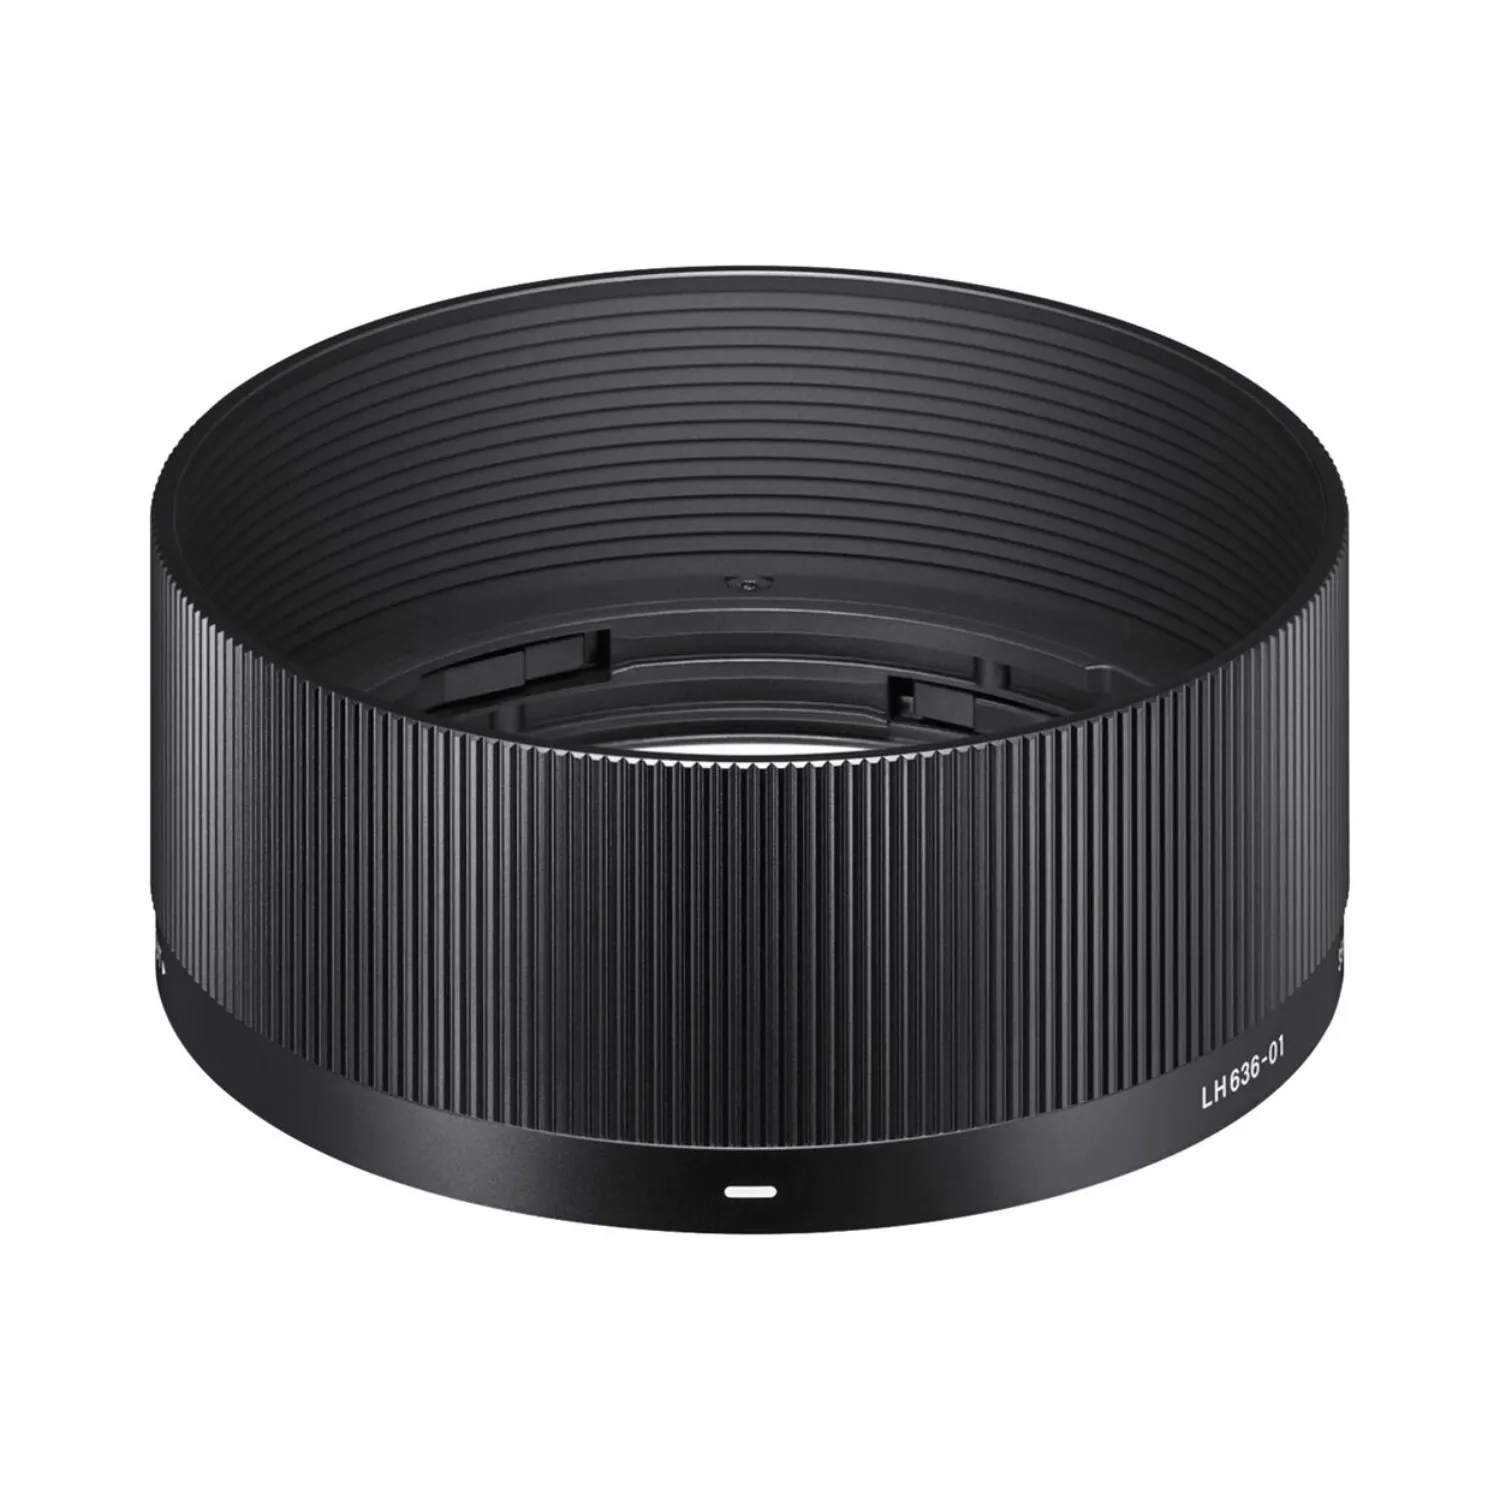 Sigma LH636-01 Lens Hood for 35mm f/2 DG DN Contemporary